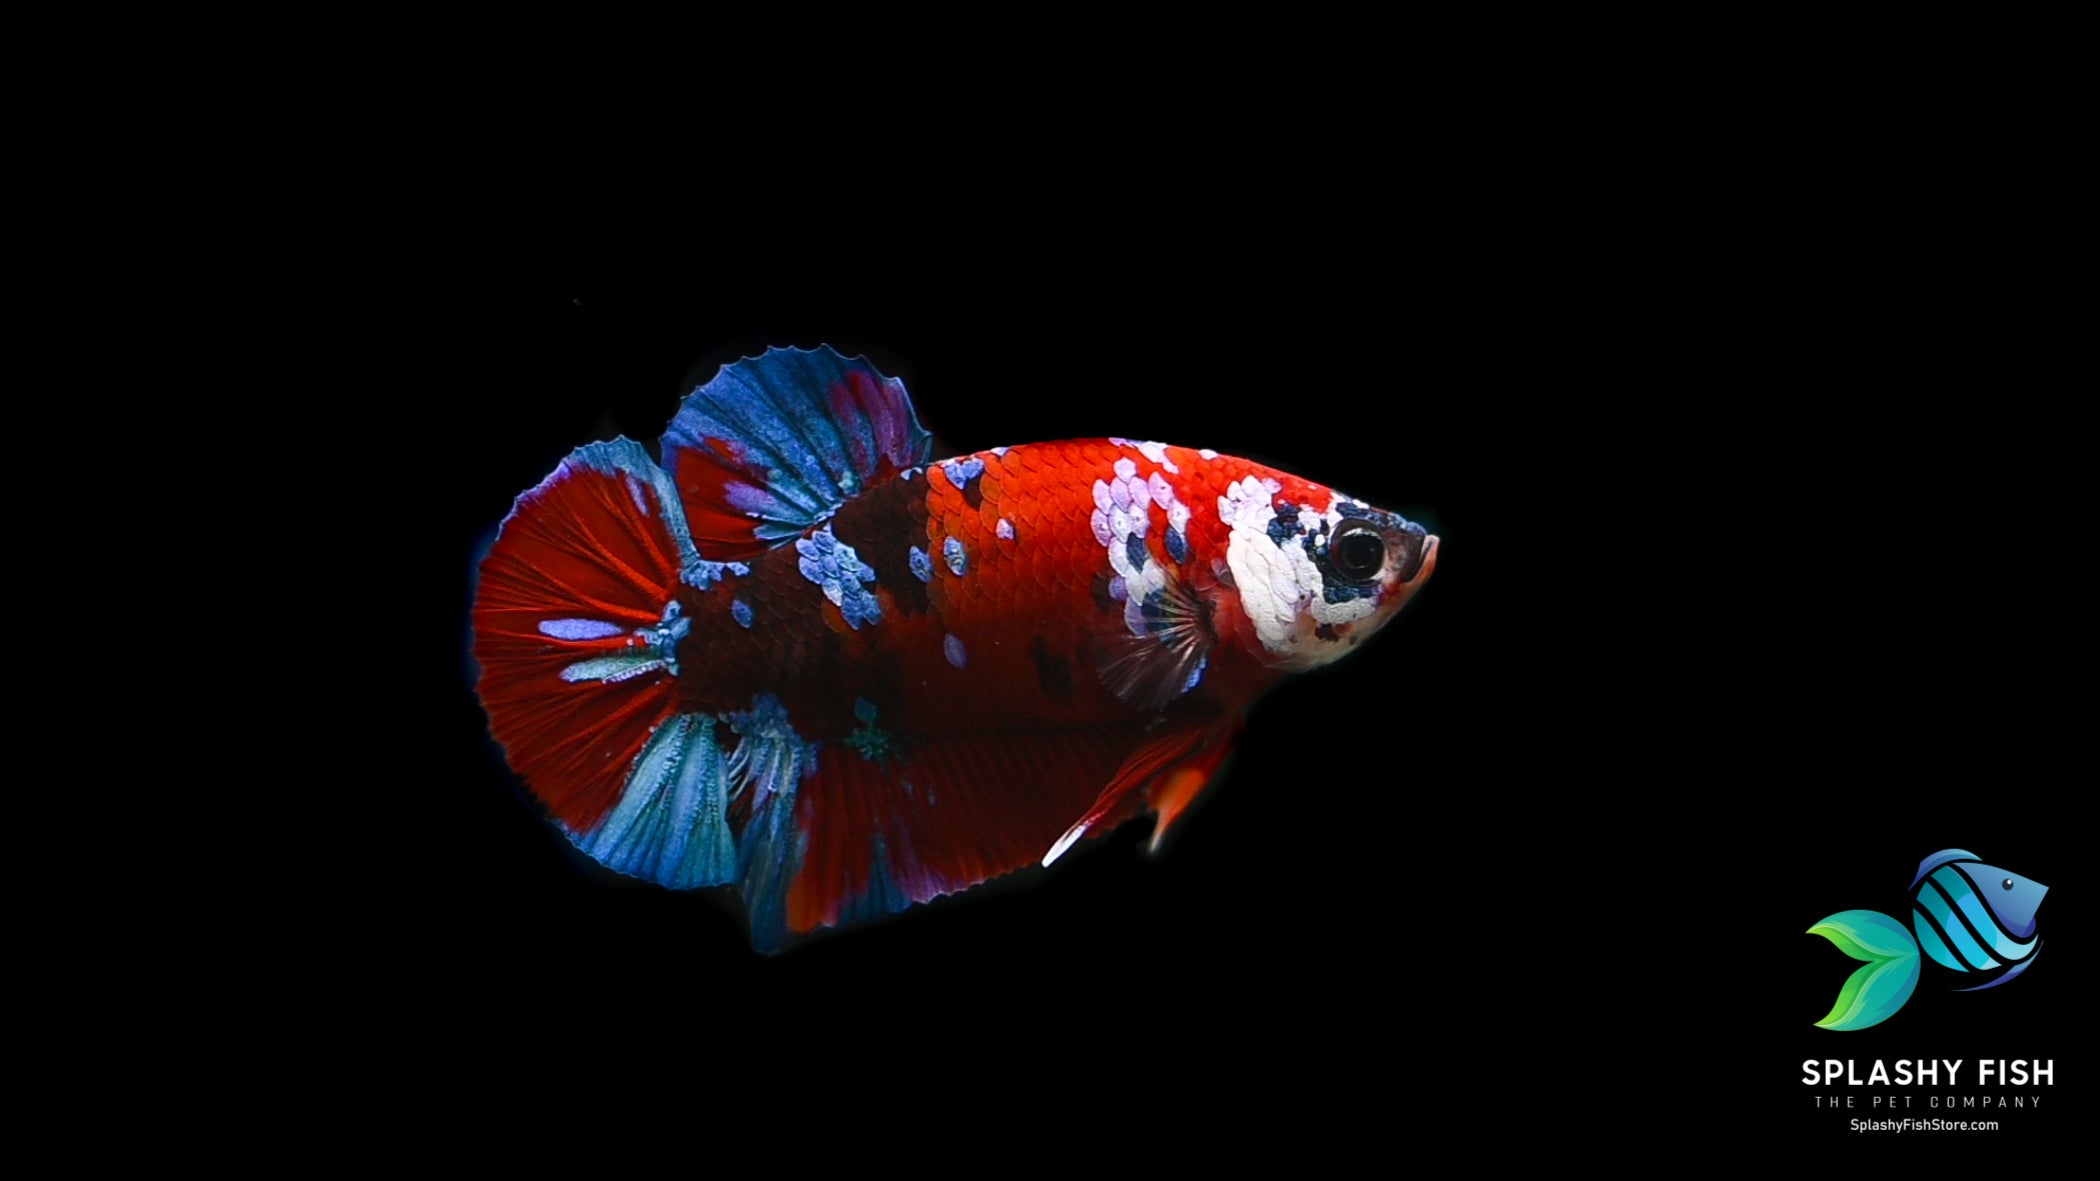 Giant Betta FIsh For Sale | King Betta Fish For Sale 